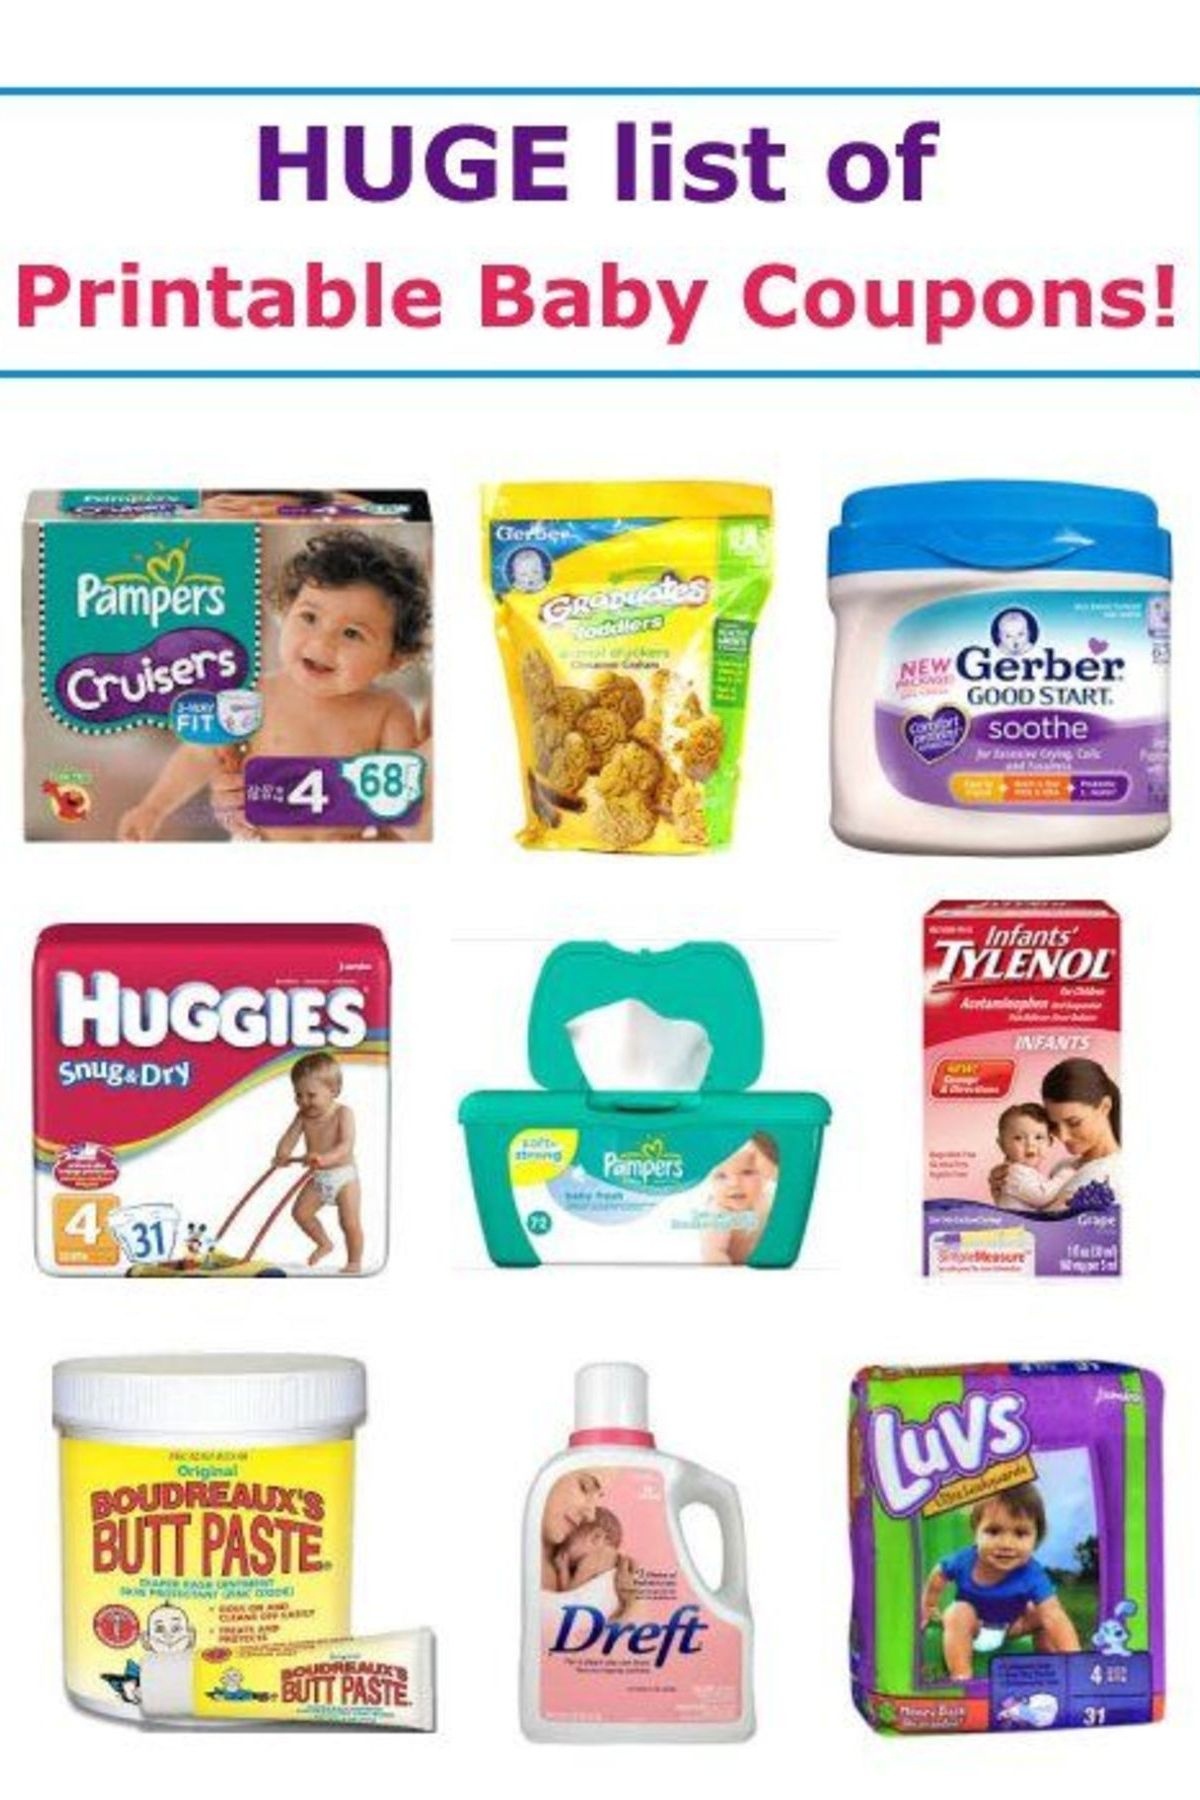 17 Printable Baby Coupons | Baby On A Budget | Baby Coupons, Baby - Free Printable Similac Baby Formula Coupons